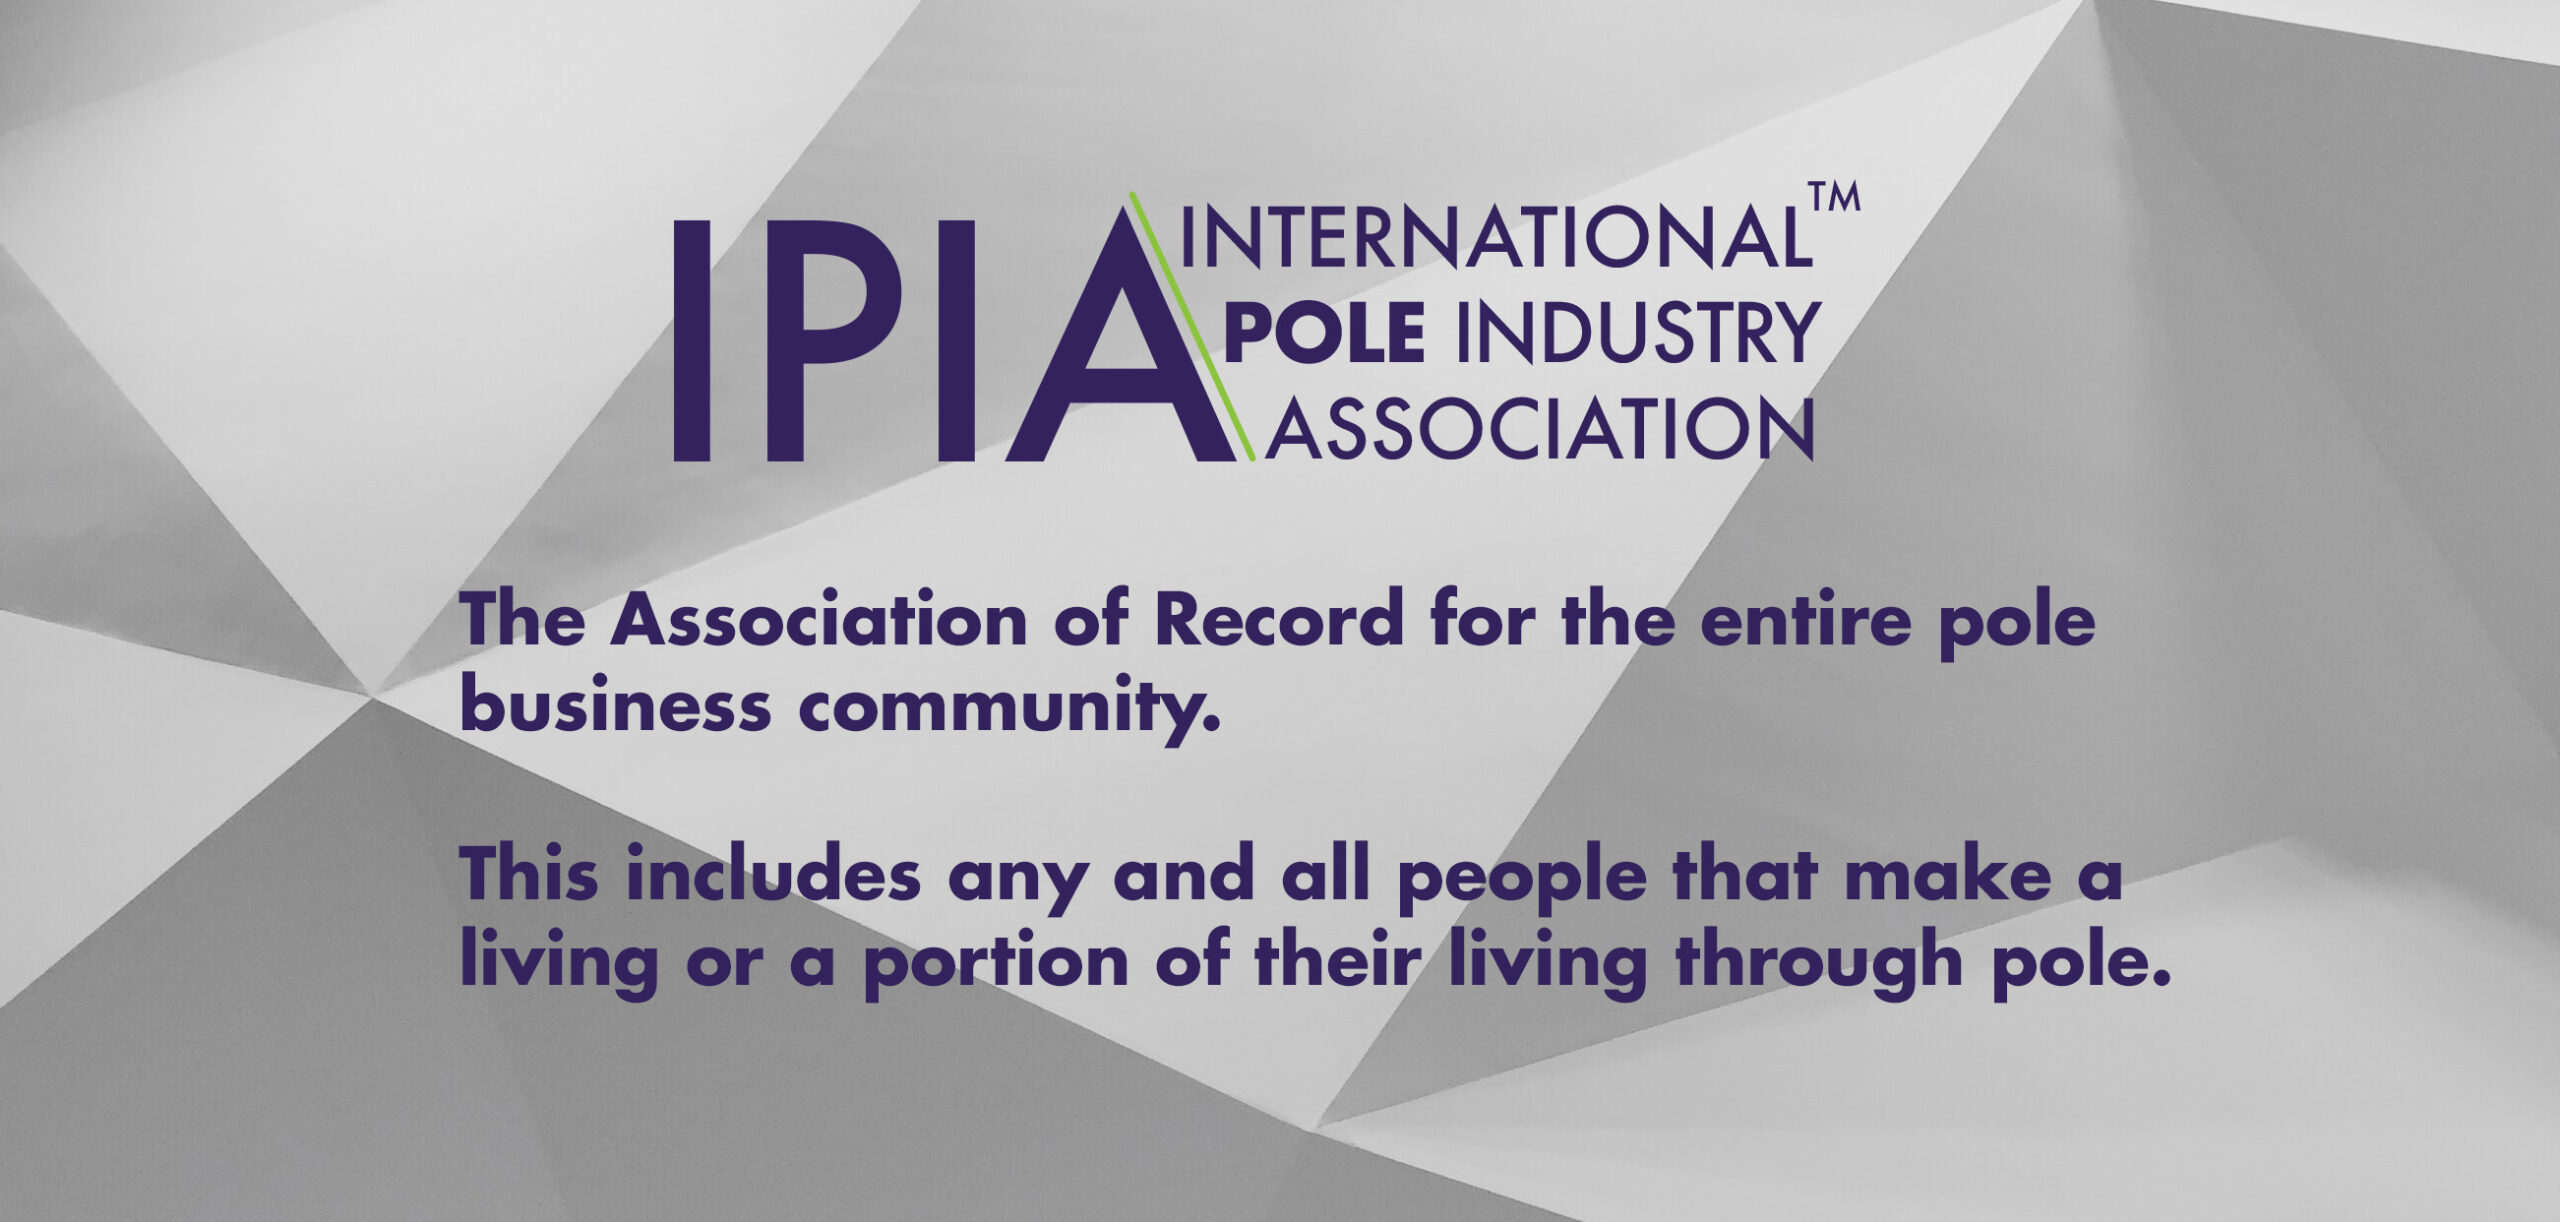 IPIA logo and text: The Association of Record for the entire pole business community. This includes any and all people that make a living or portion of their living through pole.